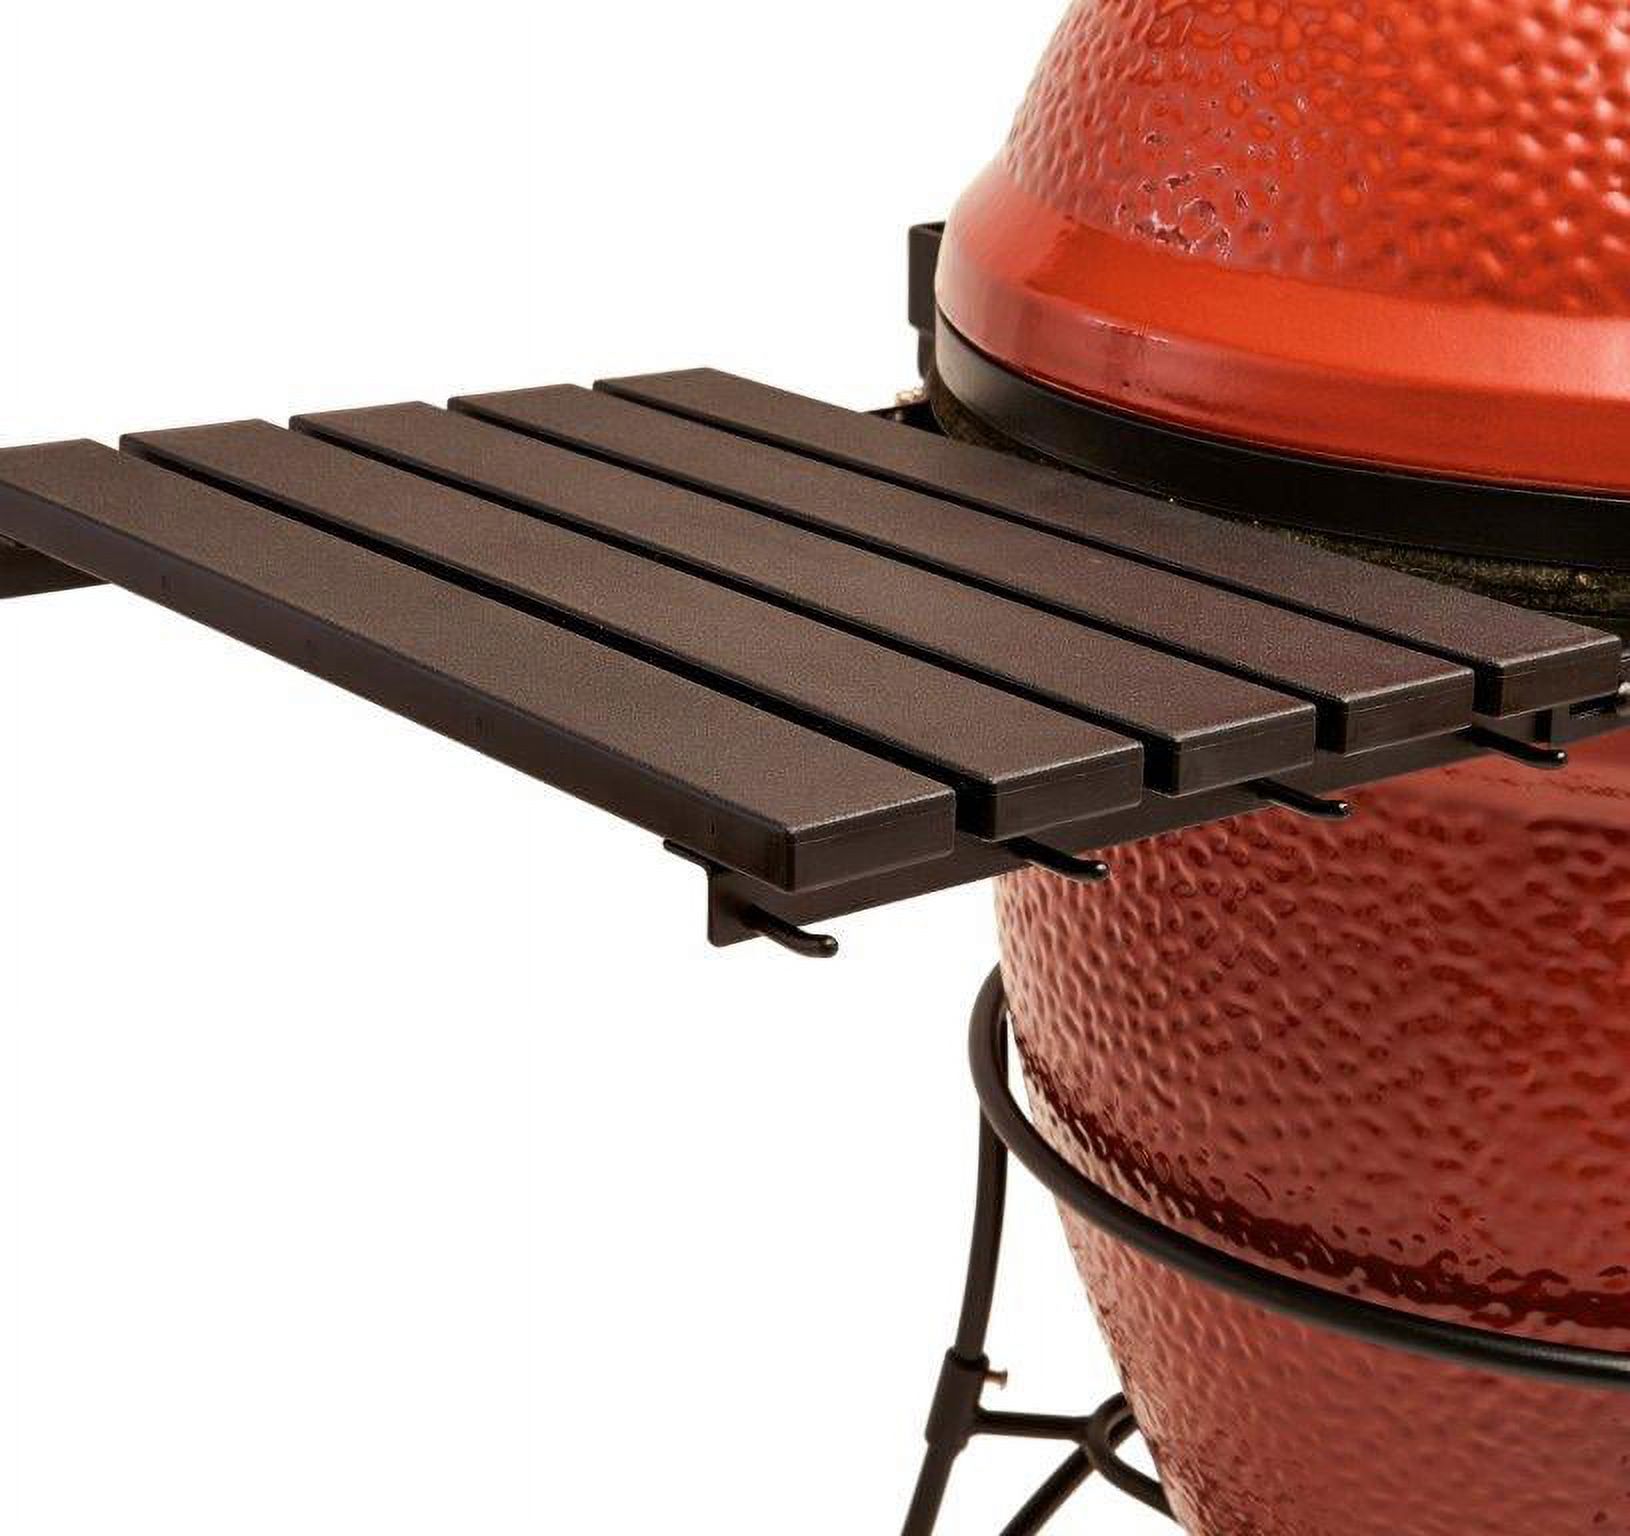 Classic Joe I 18 in. Charcoal Grill in Red with Cart, Side Shelves, Grill Gripper, and Ash Tool - image 5 of 12